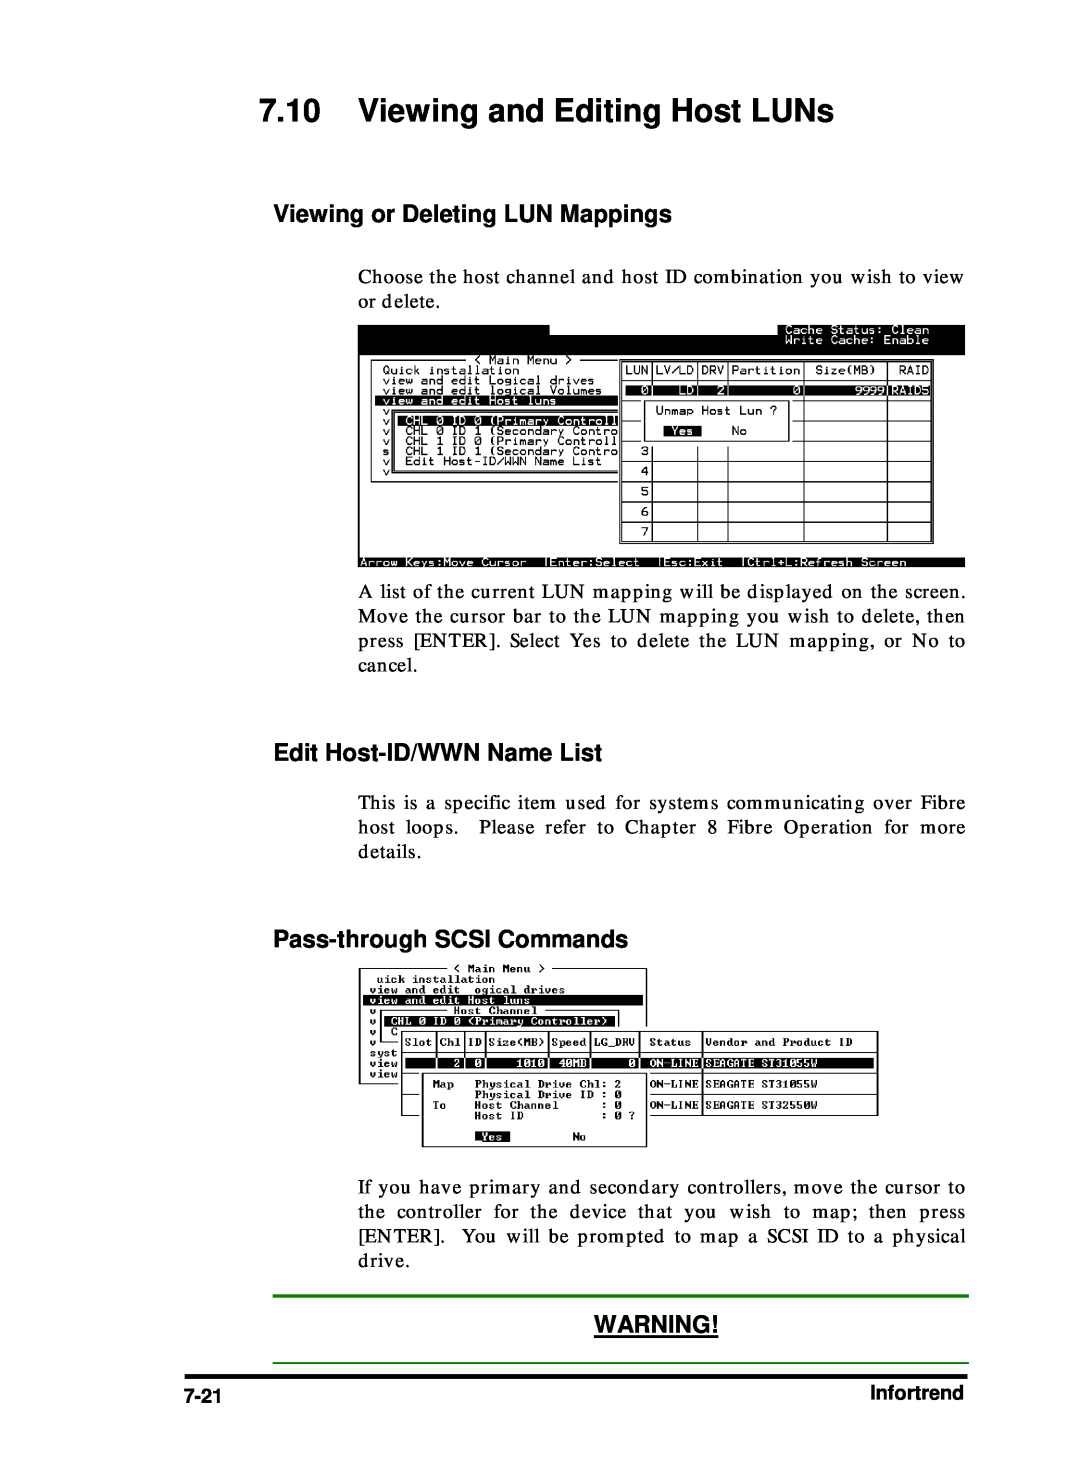 Compaq Infortrend manual Viewing and Editing Host LUNs, Viewing or Deleting LUN Mappings, Edit Host-ID/WWN Name List 